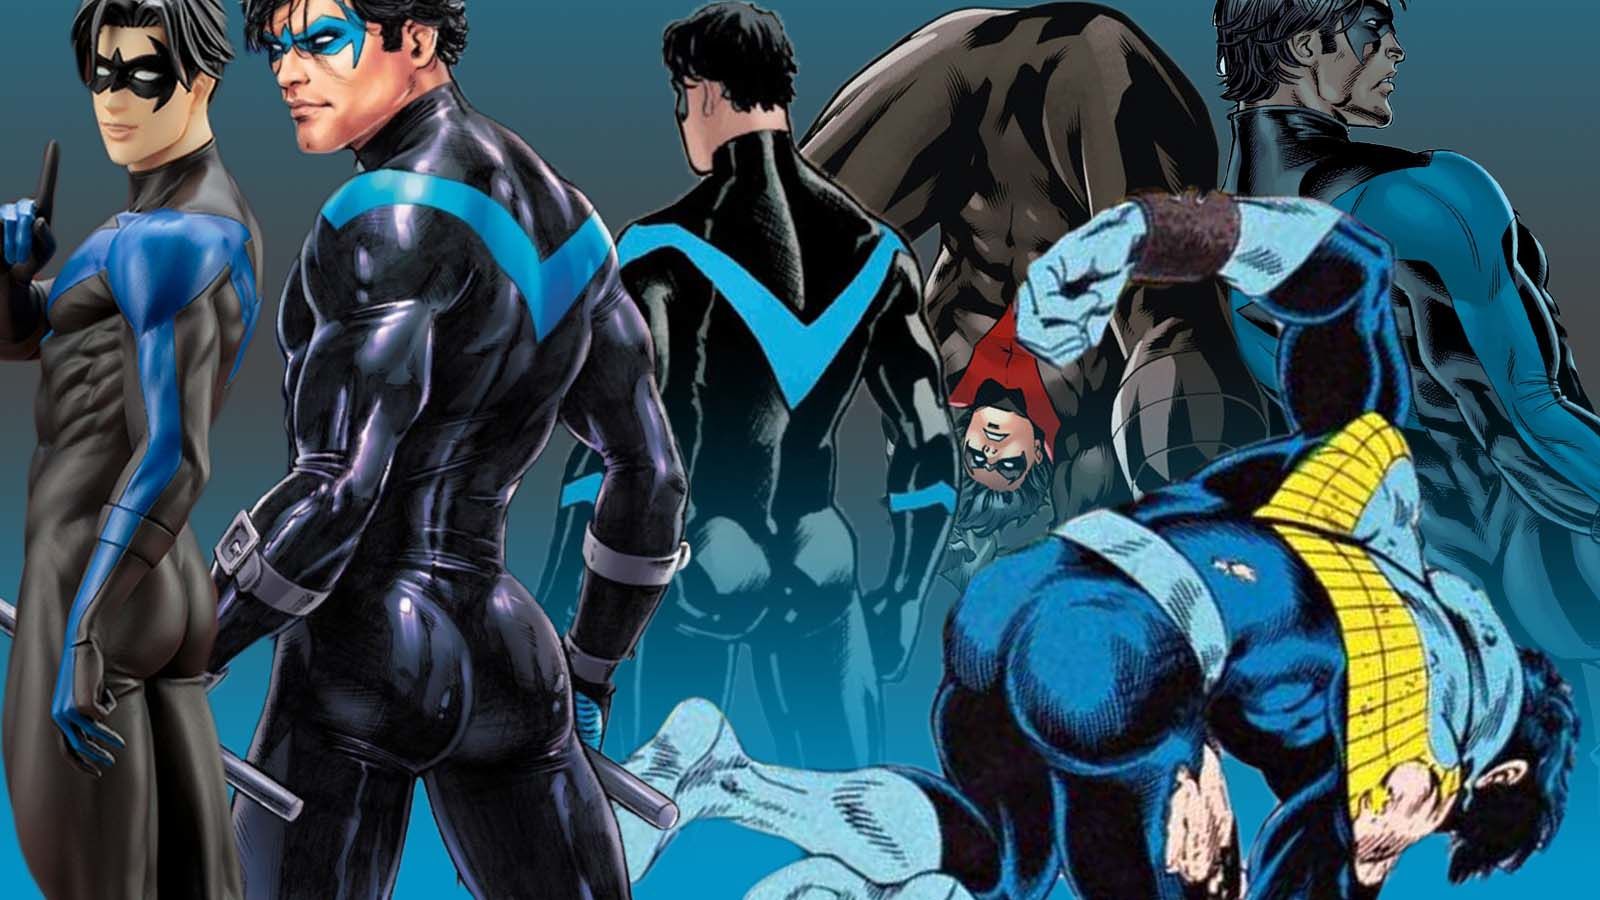 Nightwing's butt and ass